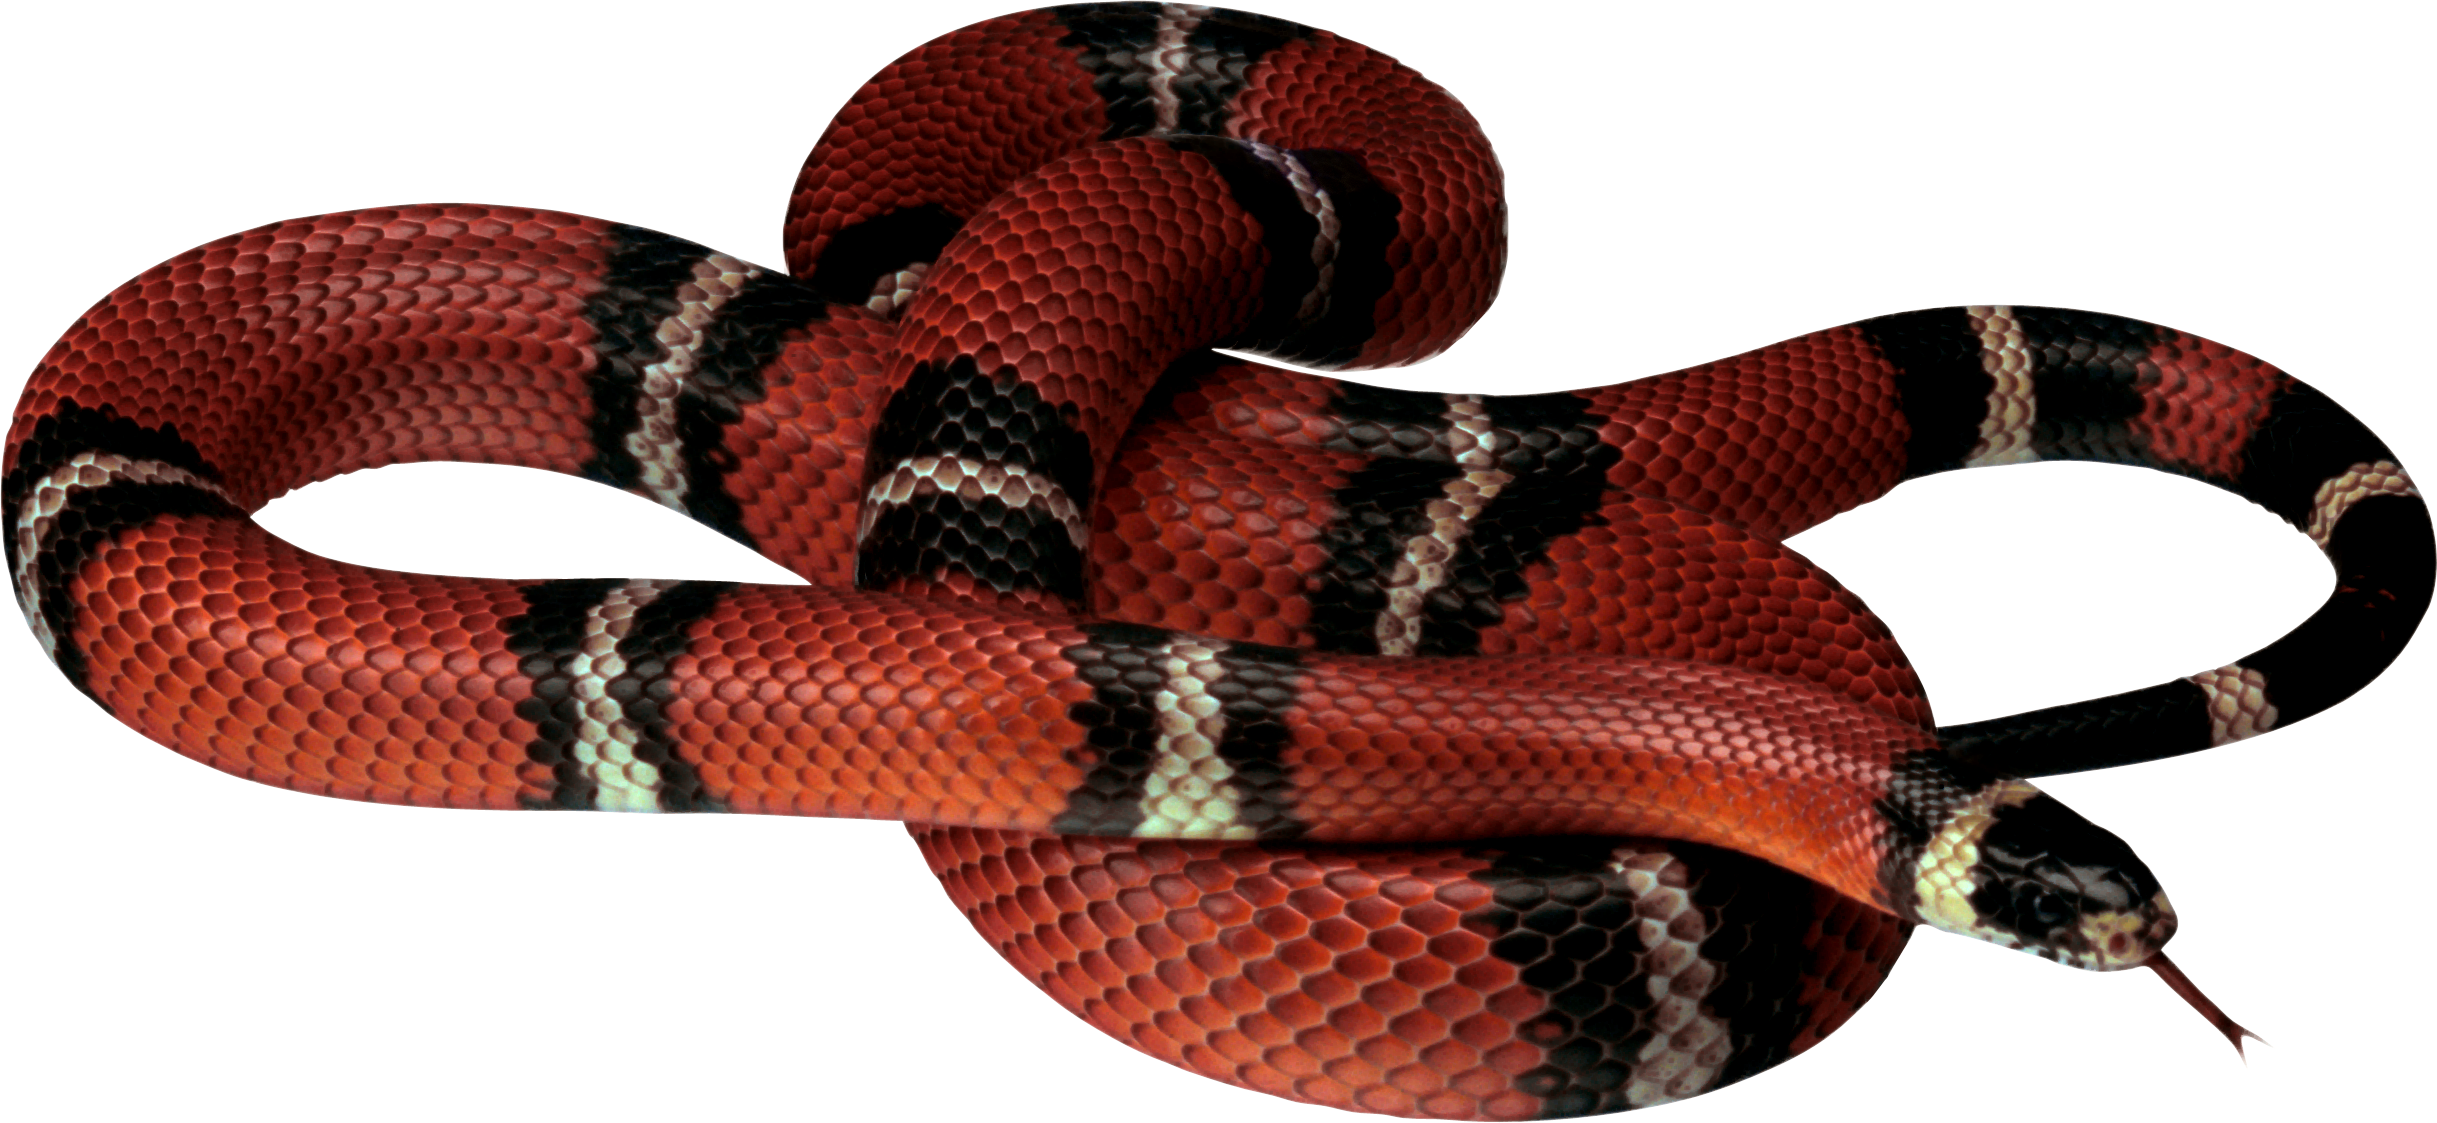 Snake Png Image Picture Snakes